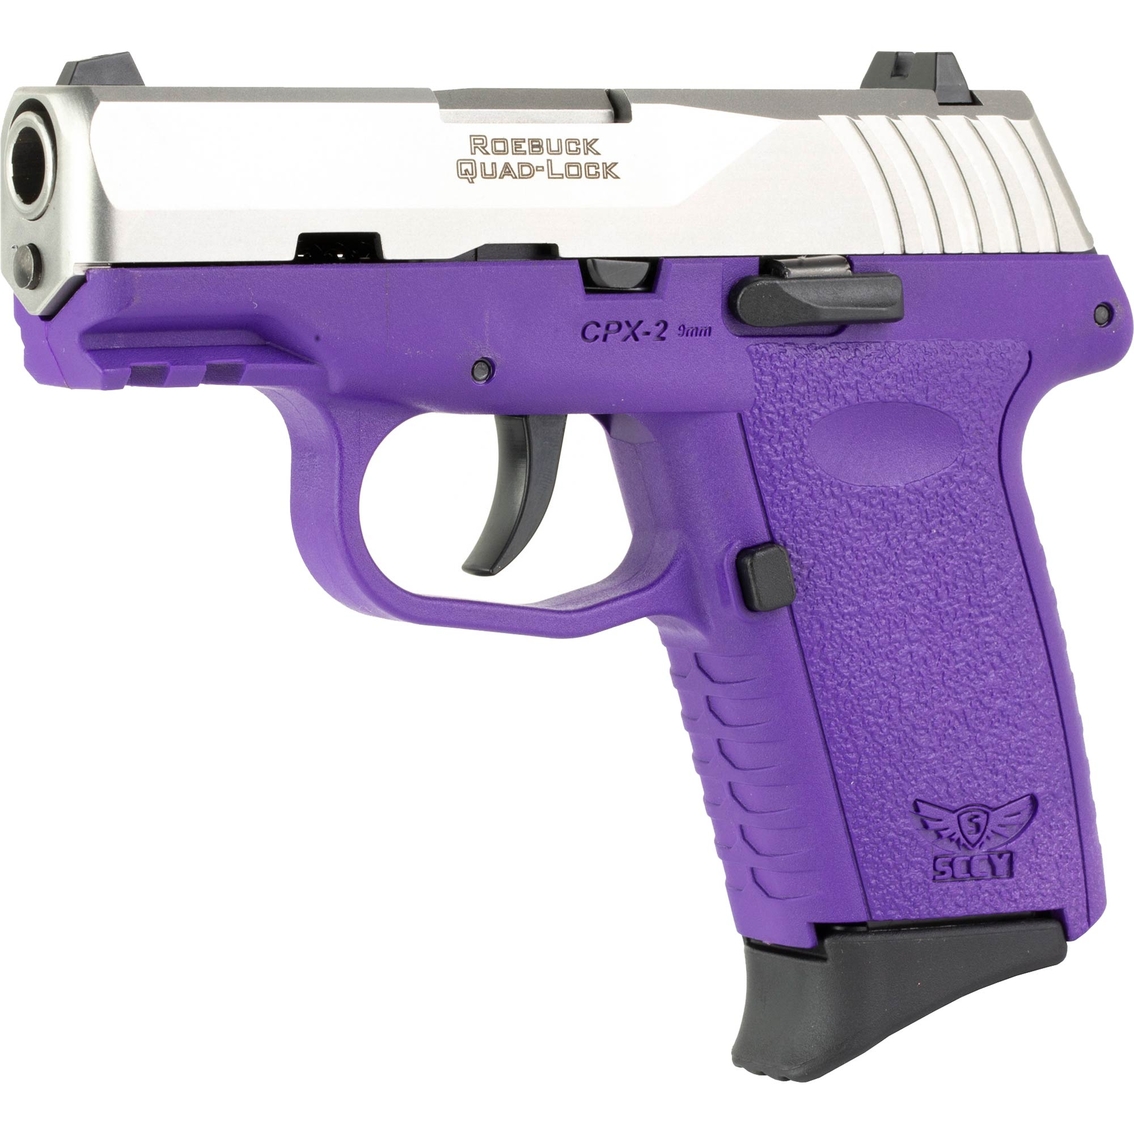 SCCY CPX-2 Gen 3 9mm 3.1 in. Barrel 10 Rds. Pistol - Image 3 of 3